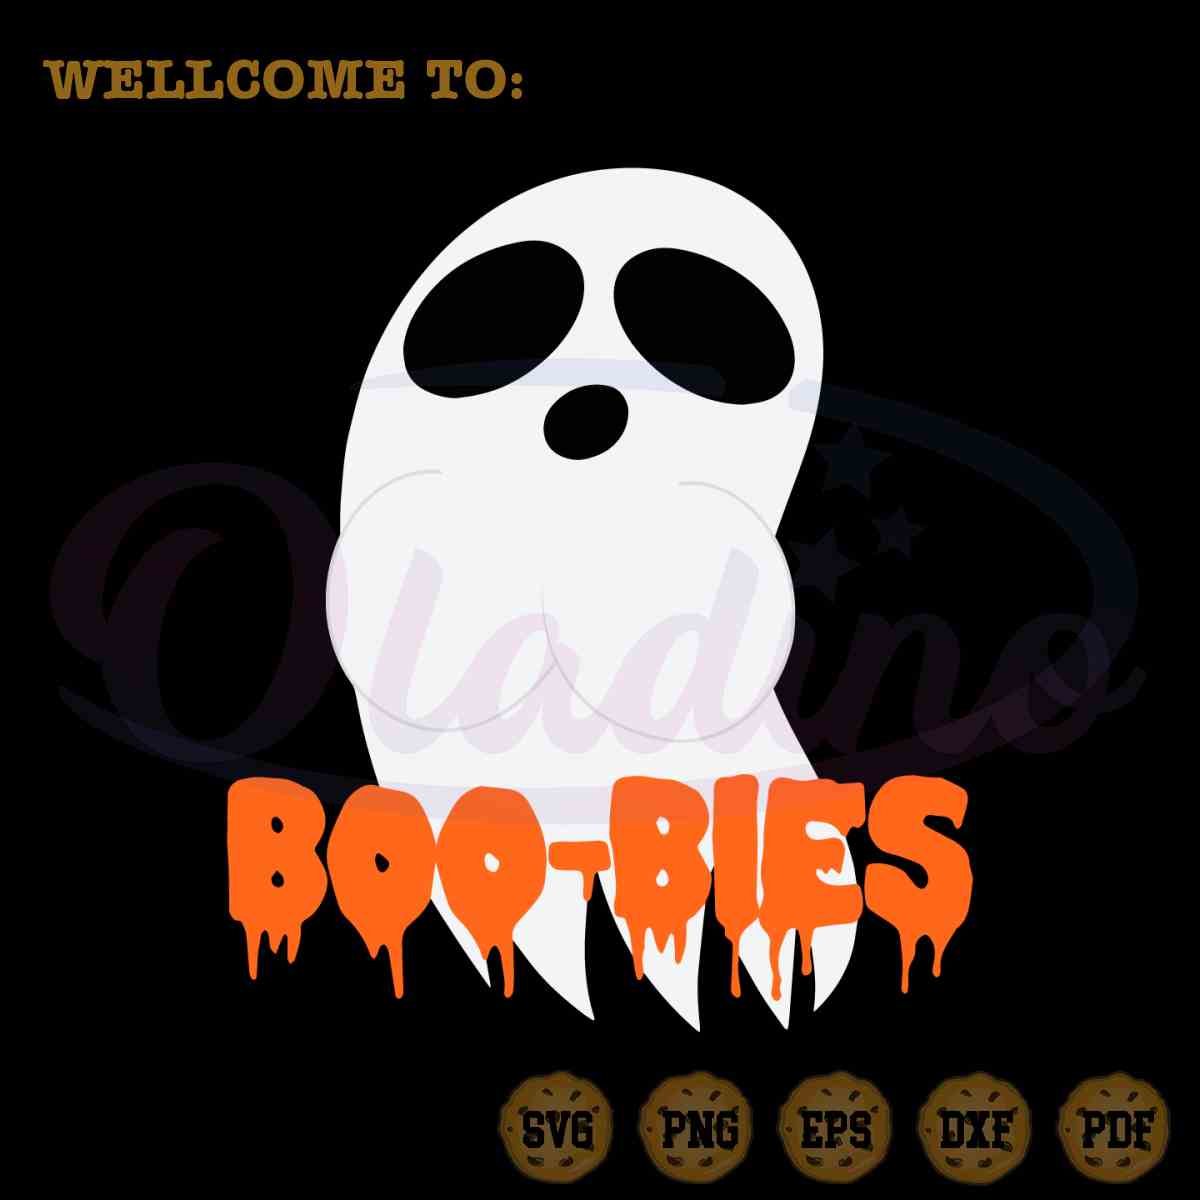 halloween-funny-ghost-boo-bies-svg-graphic-designs-files